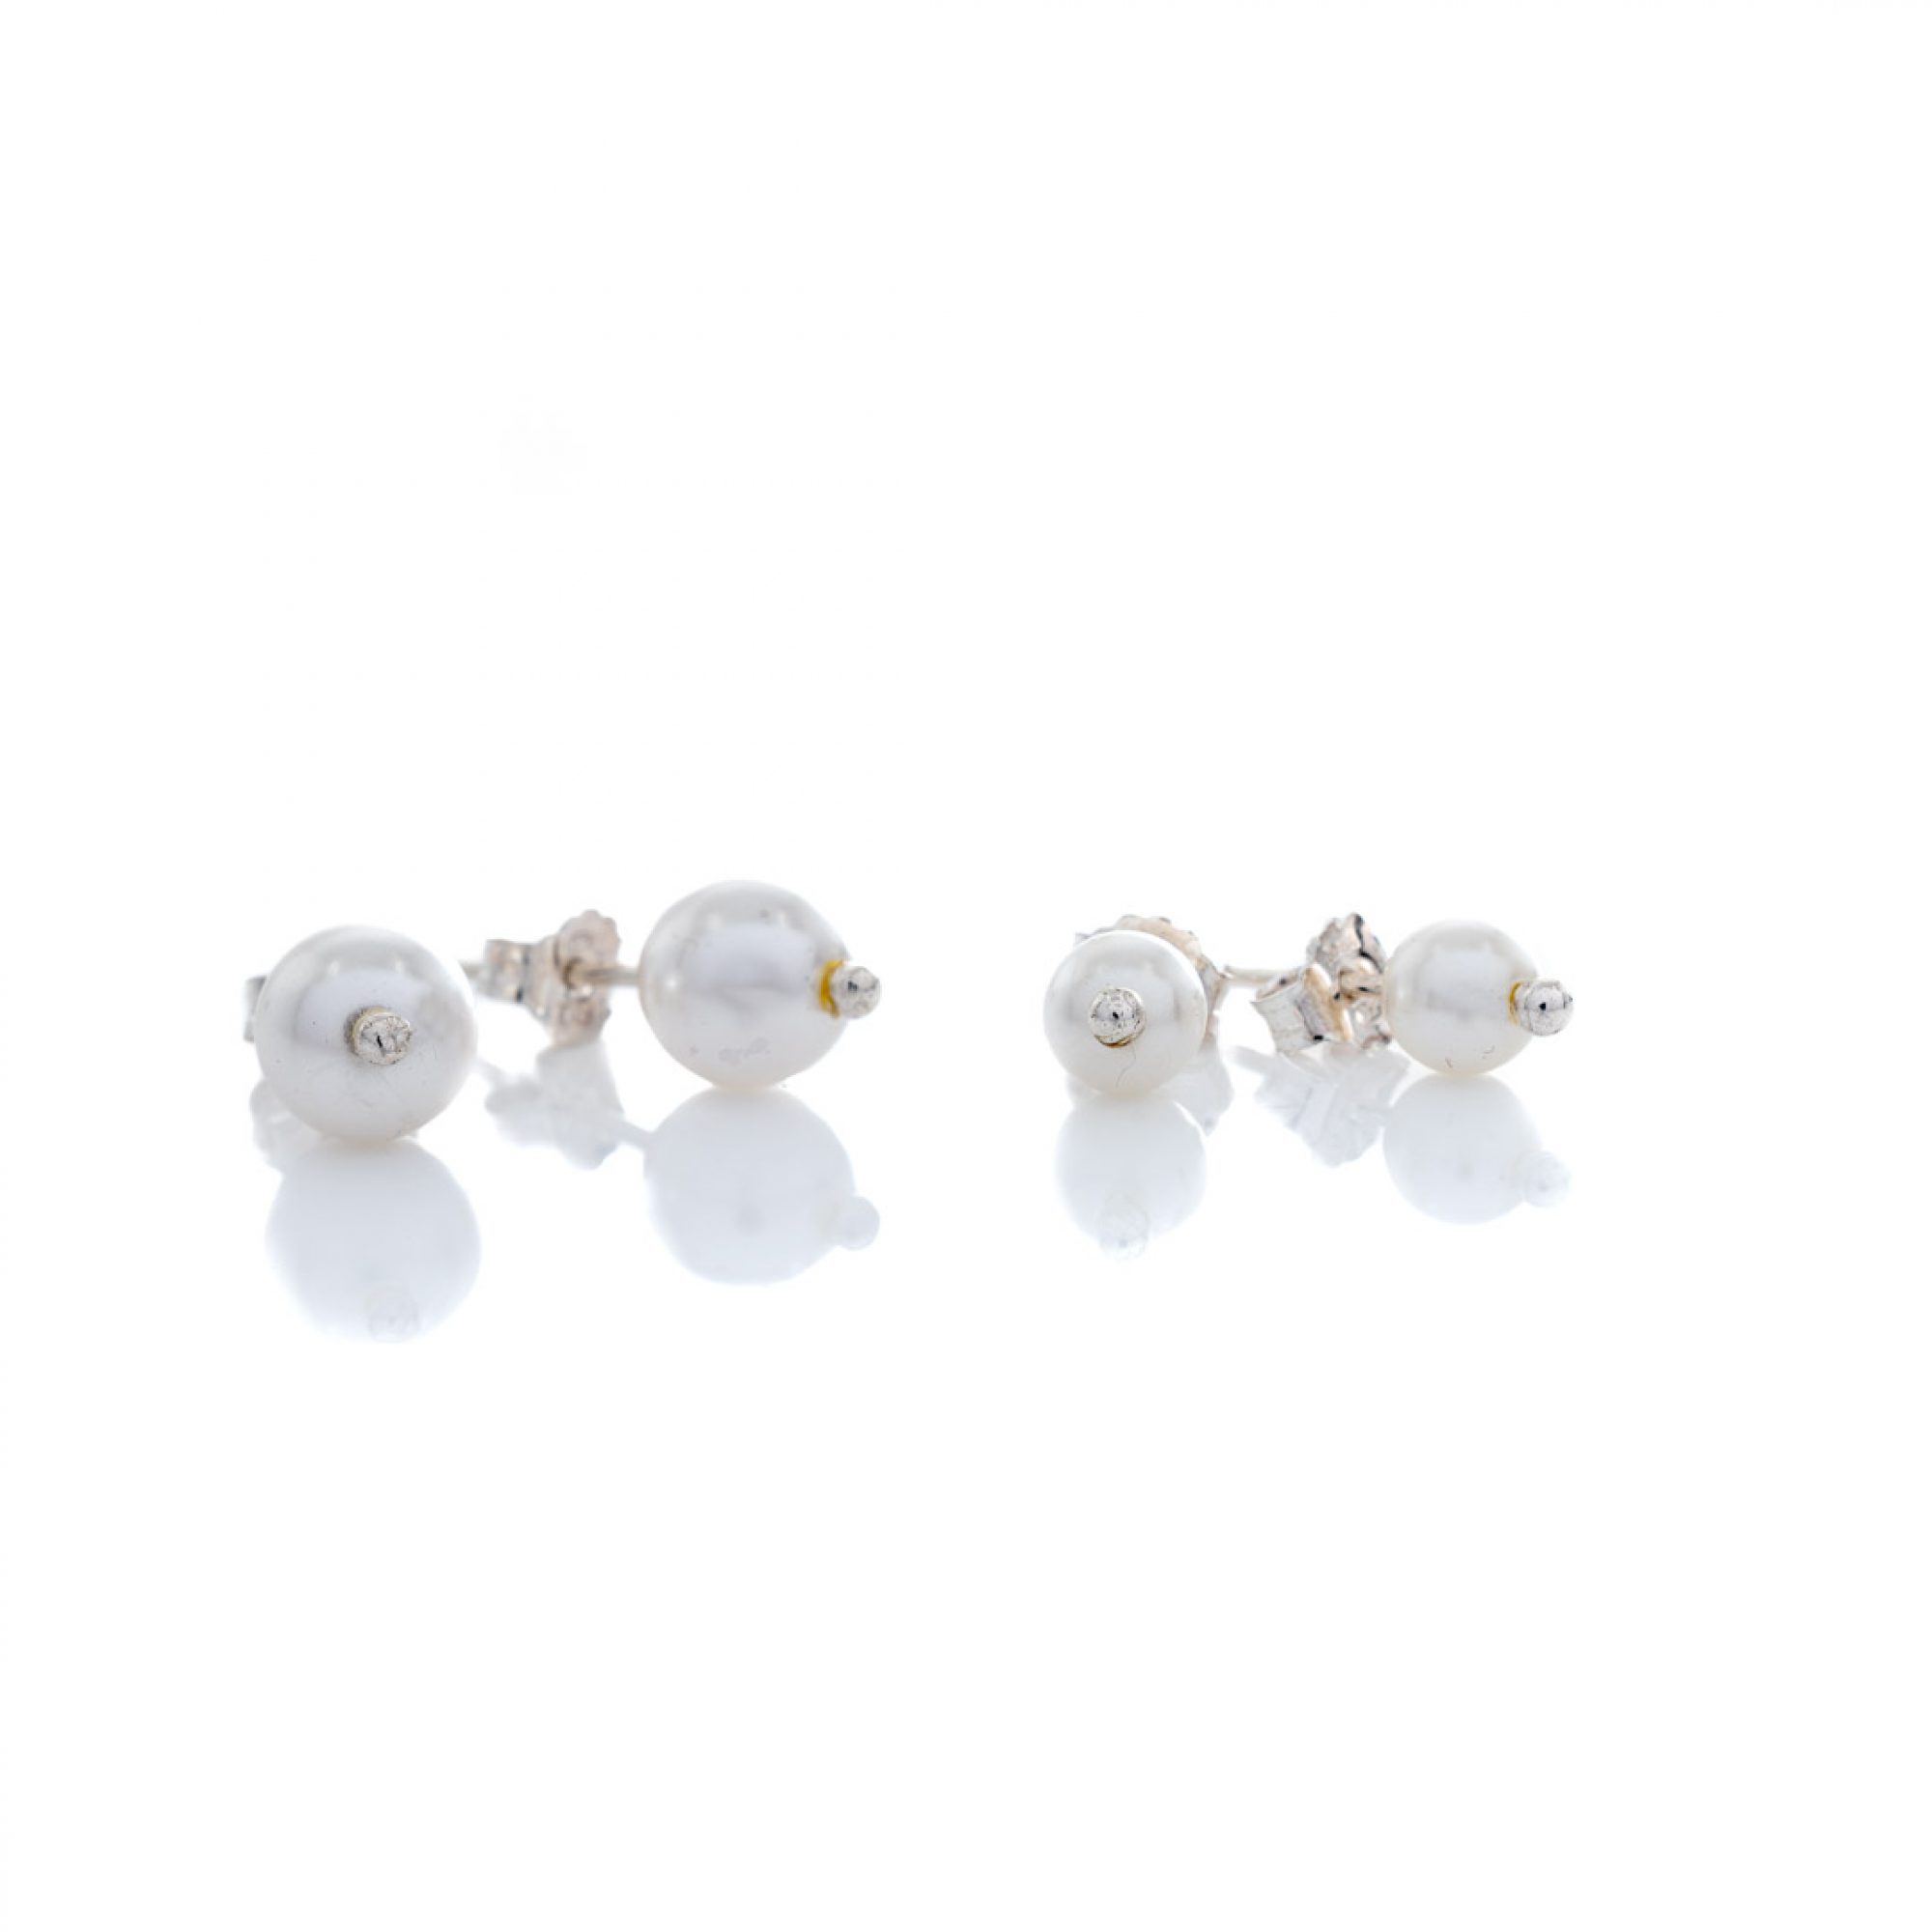 Silver stud earrings with pearl